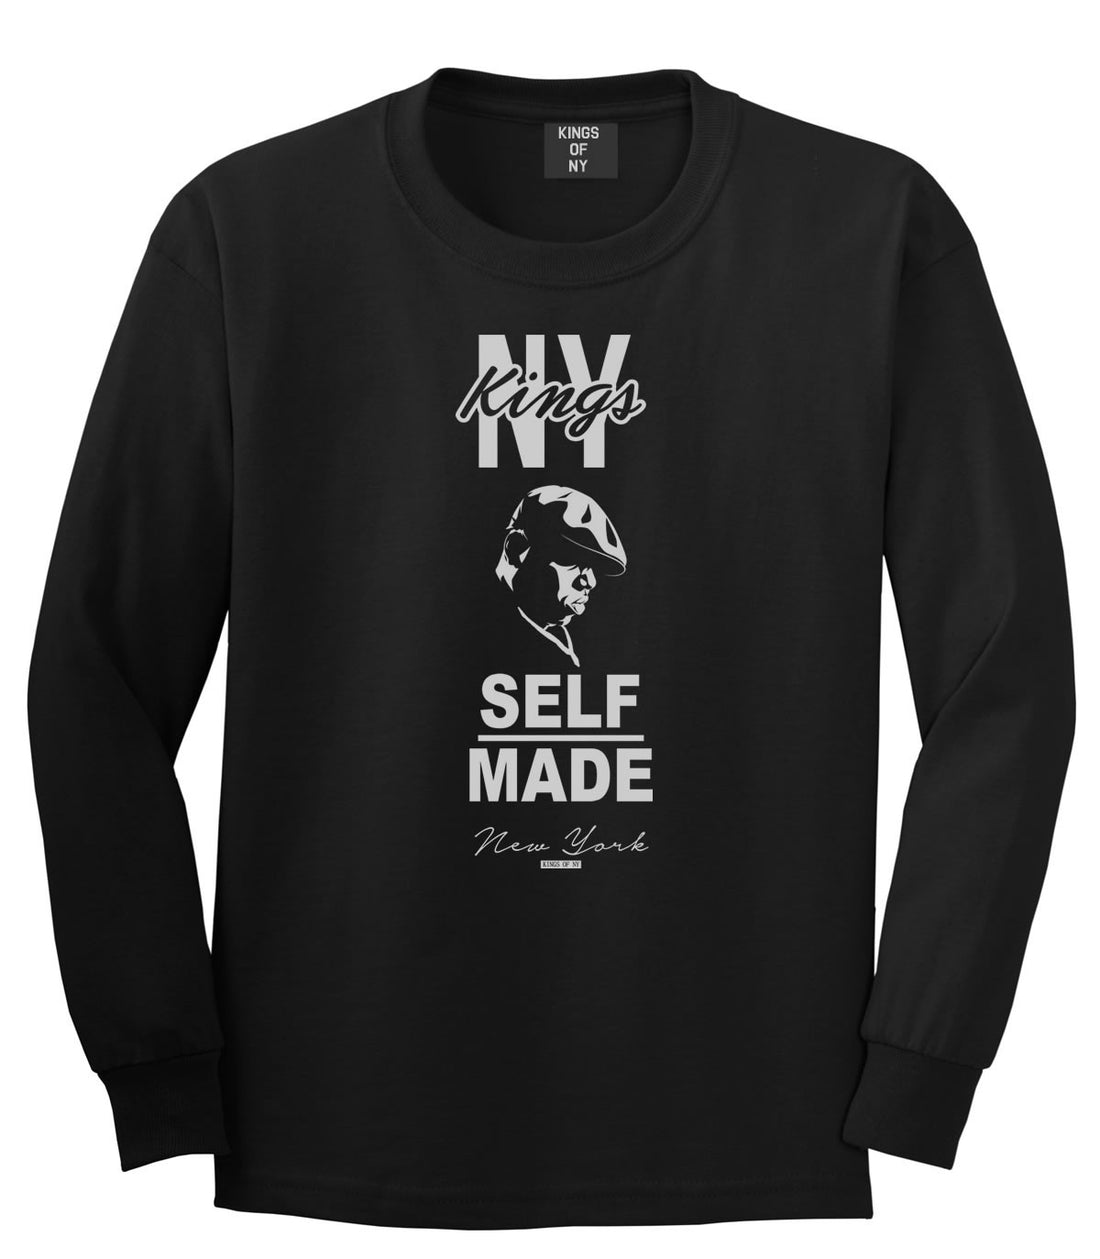 NY Kings Self Made Biggie Long Sleeve T-Shirt in Black By Kings Of NY